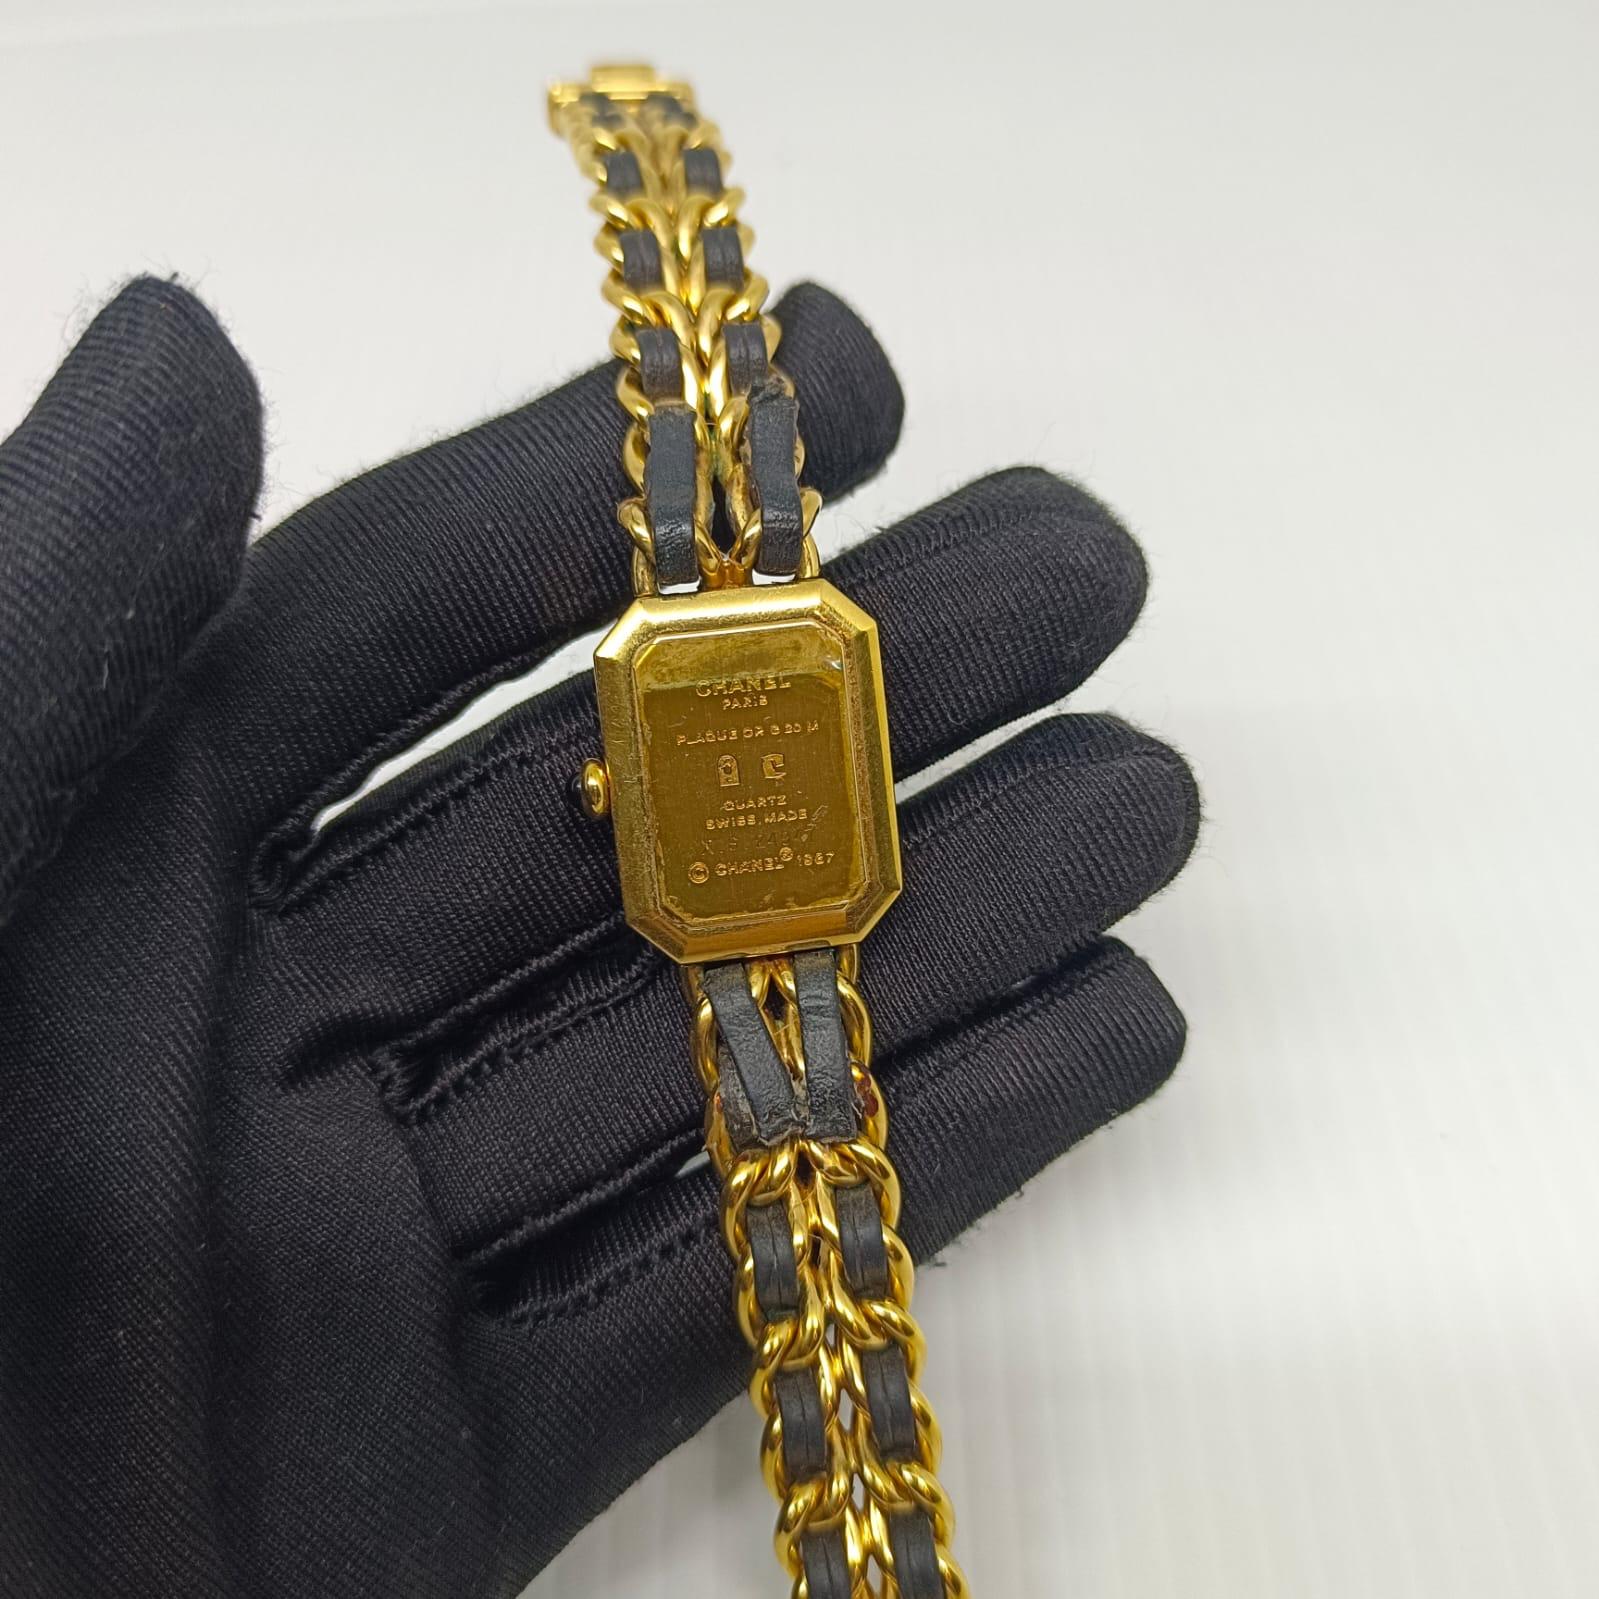 Vintage chanel premiere watch. Its considered a classic collection from Chanel and theyre still producing the newer version now. Comes as it is with no inclusion. Faint scratches on the hardware and tarnishing. Watch is still working. Will put the